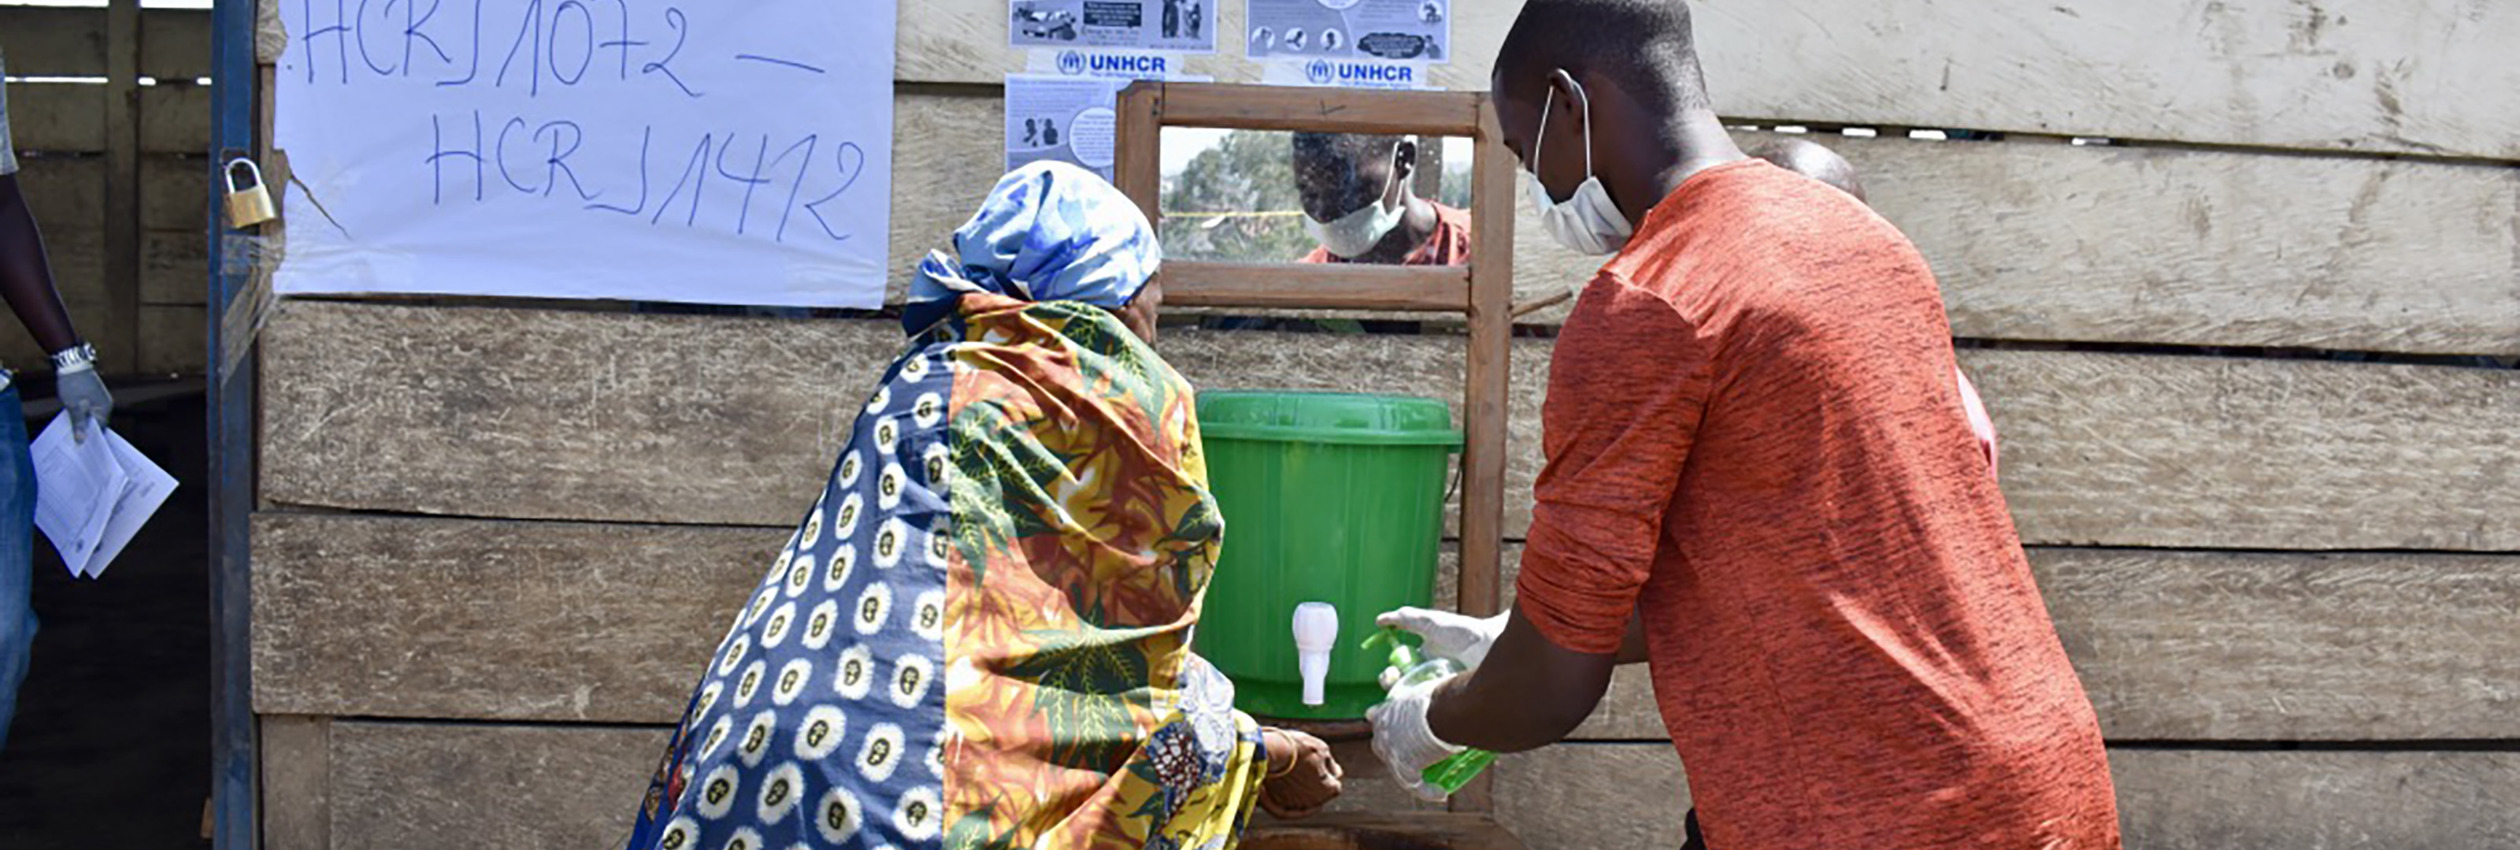 Refugees washing their hands in the DRC